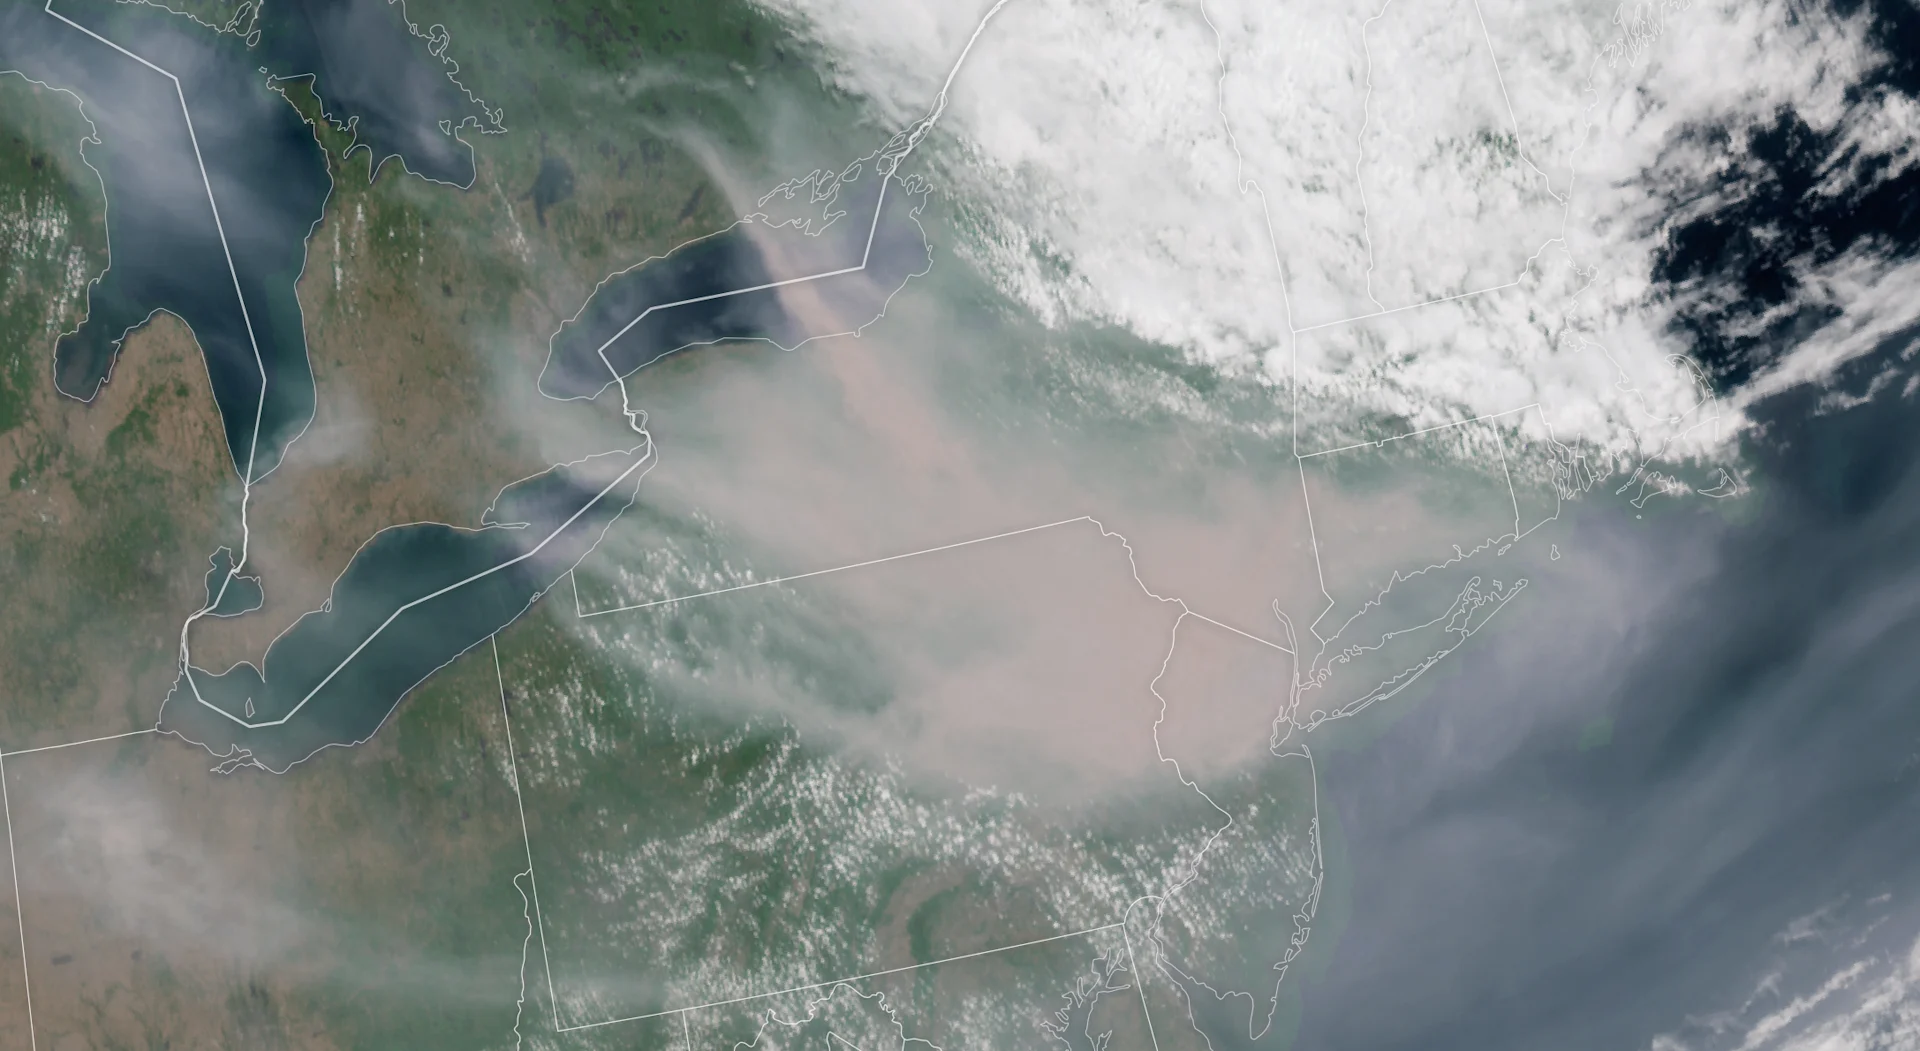 Canada’s hot, fiery summer generating historic smoke emissions